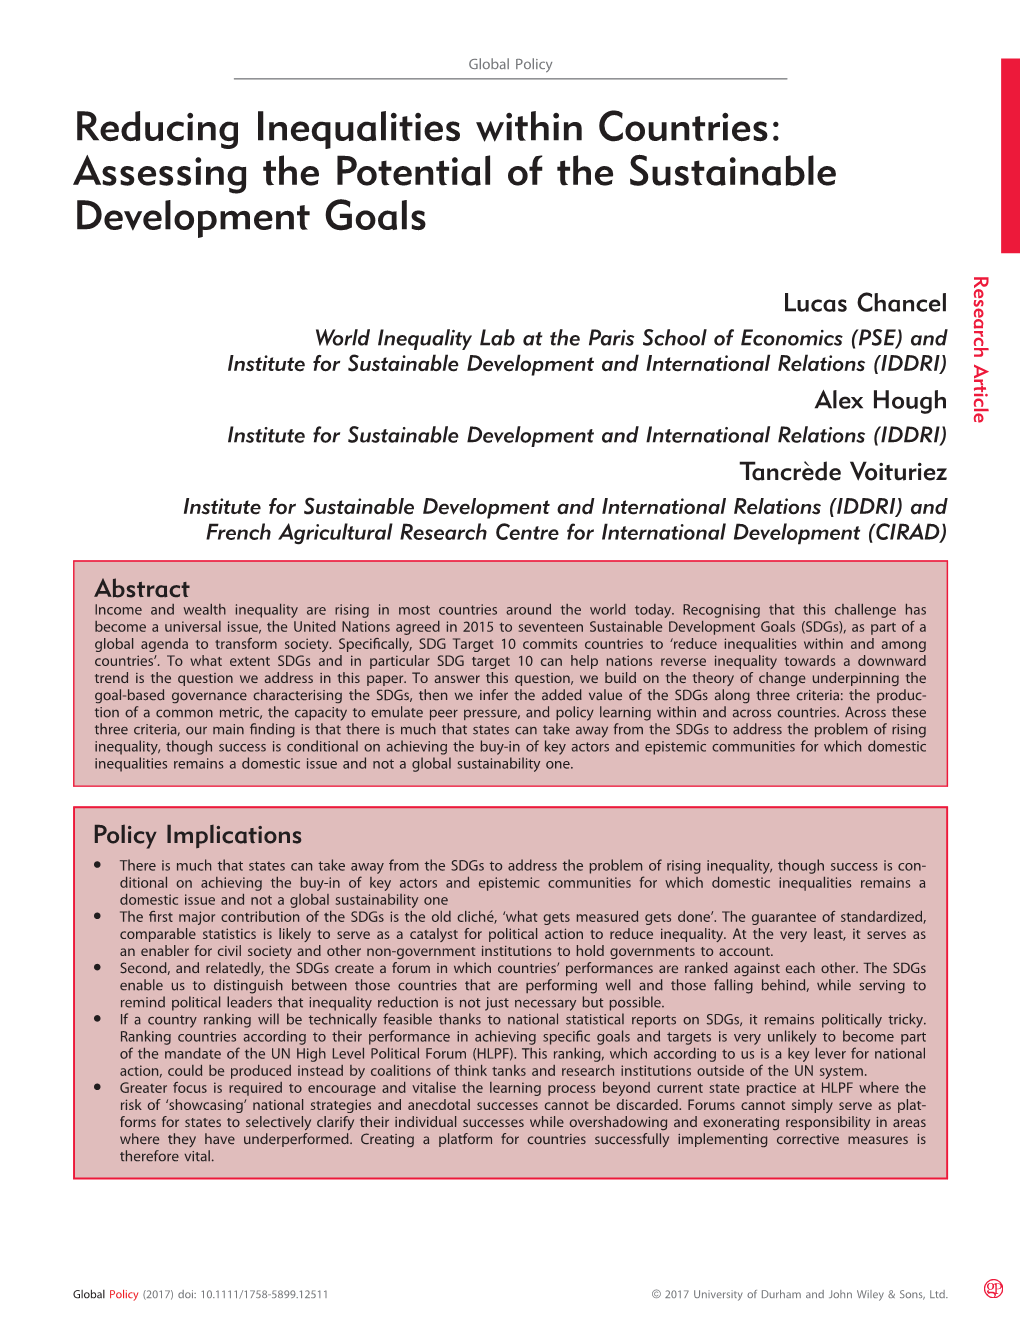 Reducing Inequalities Within Countries: Assessing the Potential of the Sustainable Development Goals